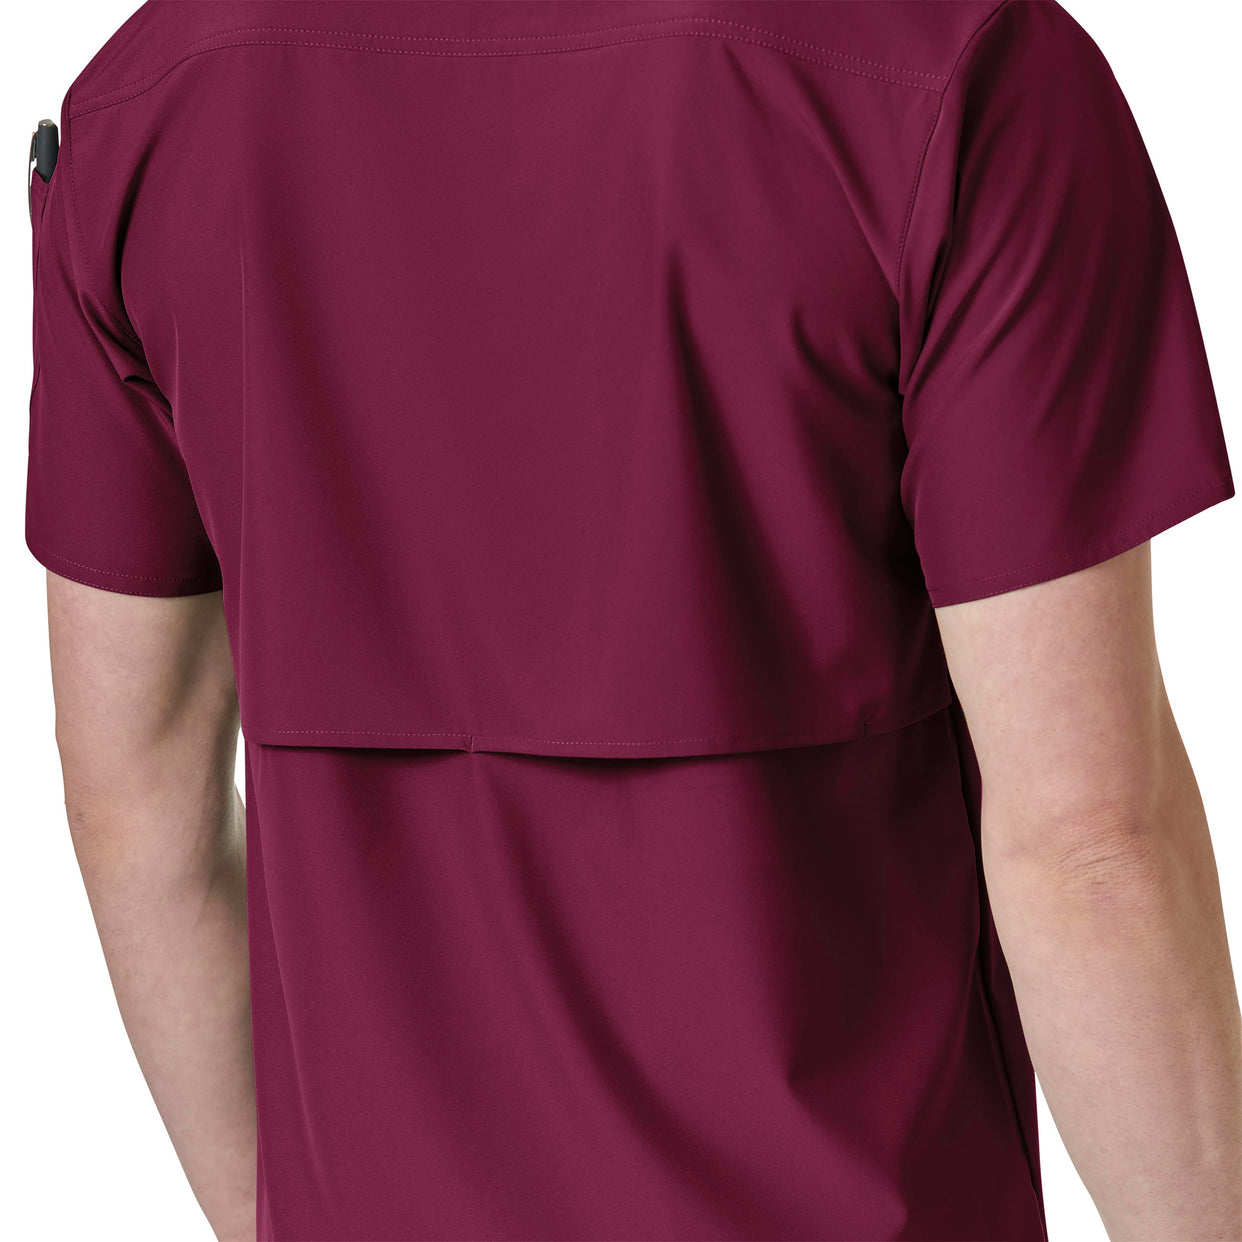 Force Liberty Men's Twill Chest Pocket Scrub Top Wine front detail